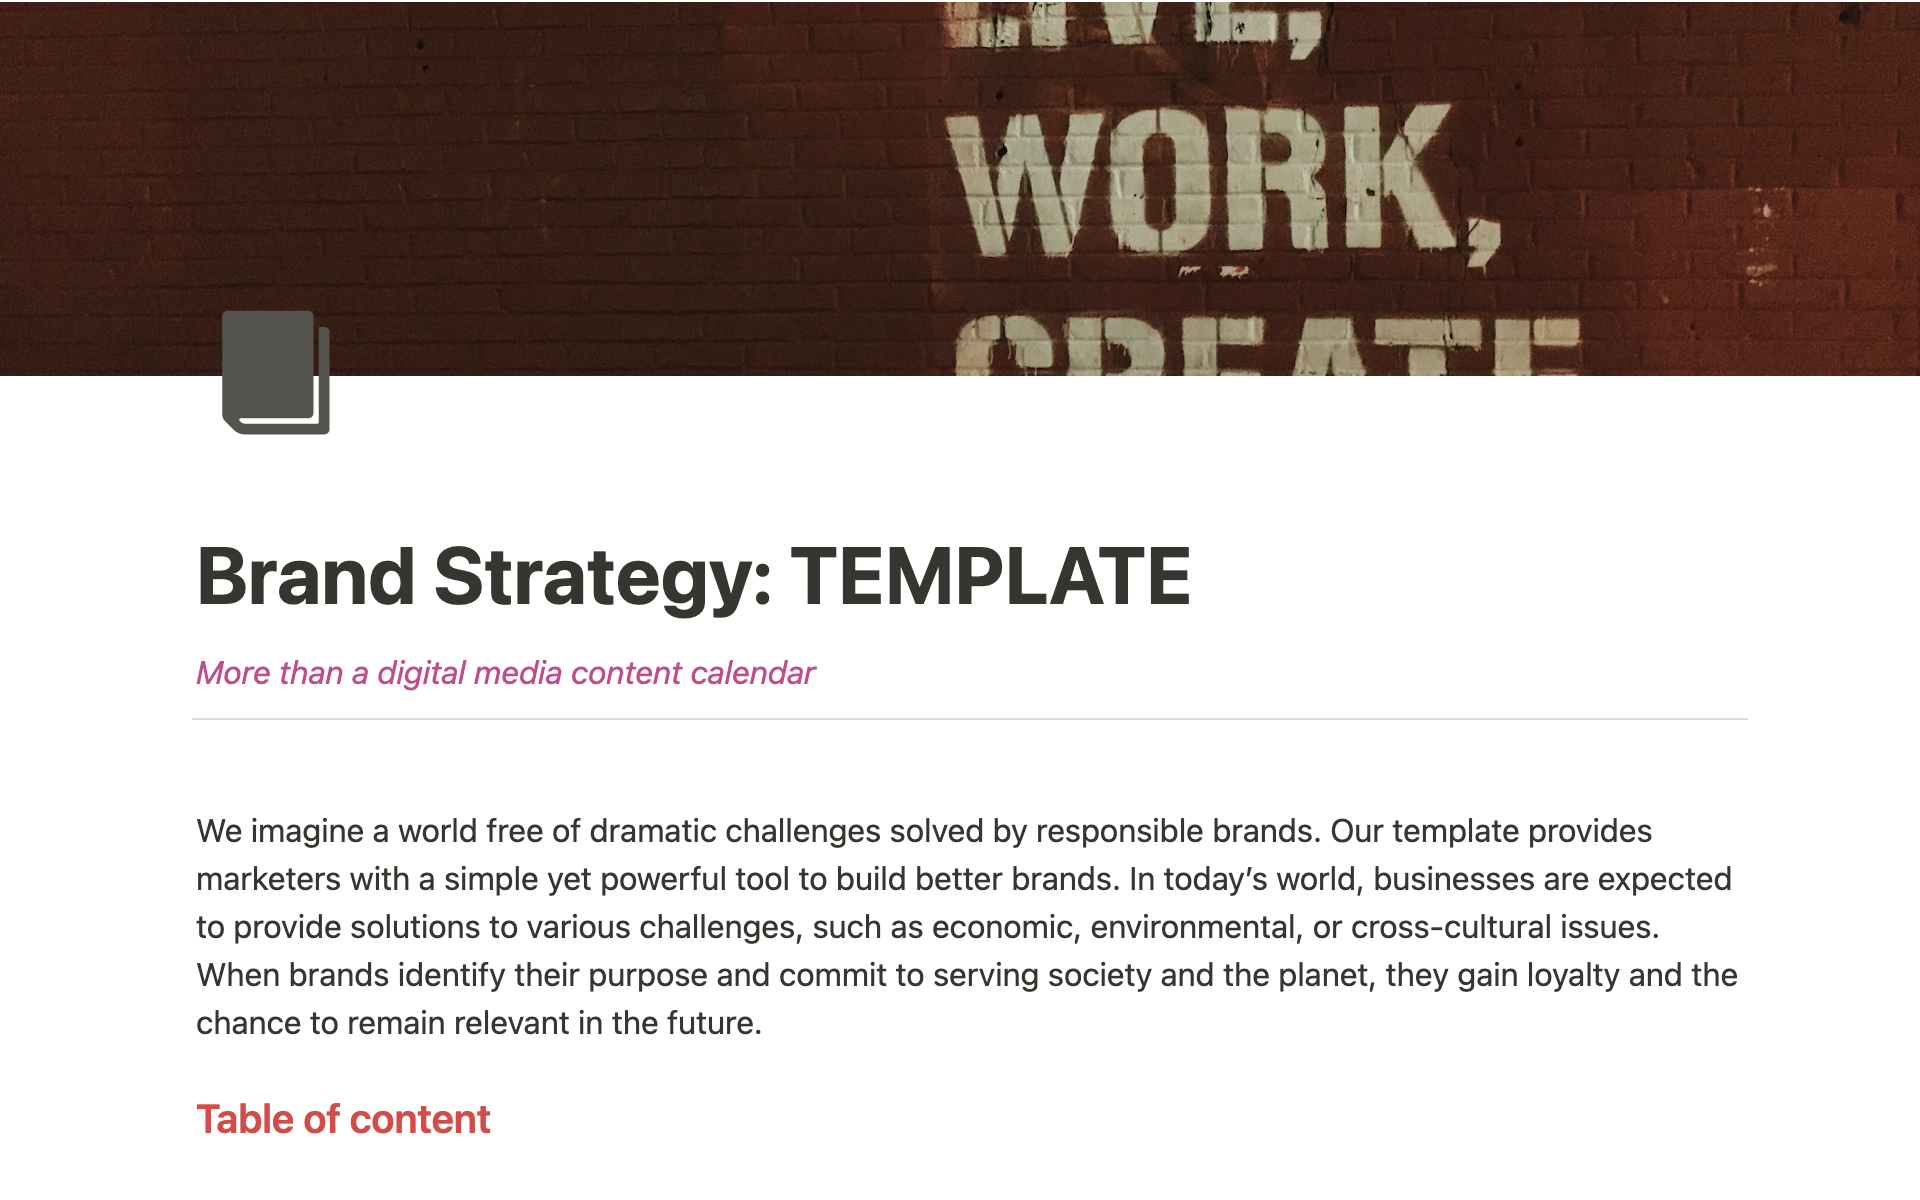 A comprehensive framework for brand strategy planning and execution.